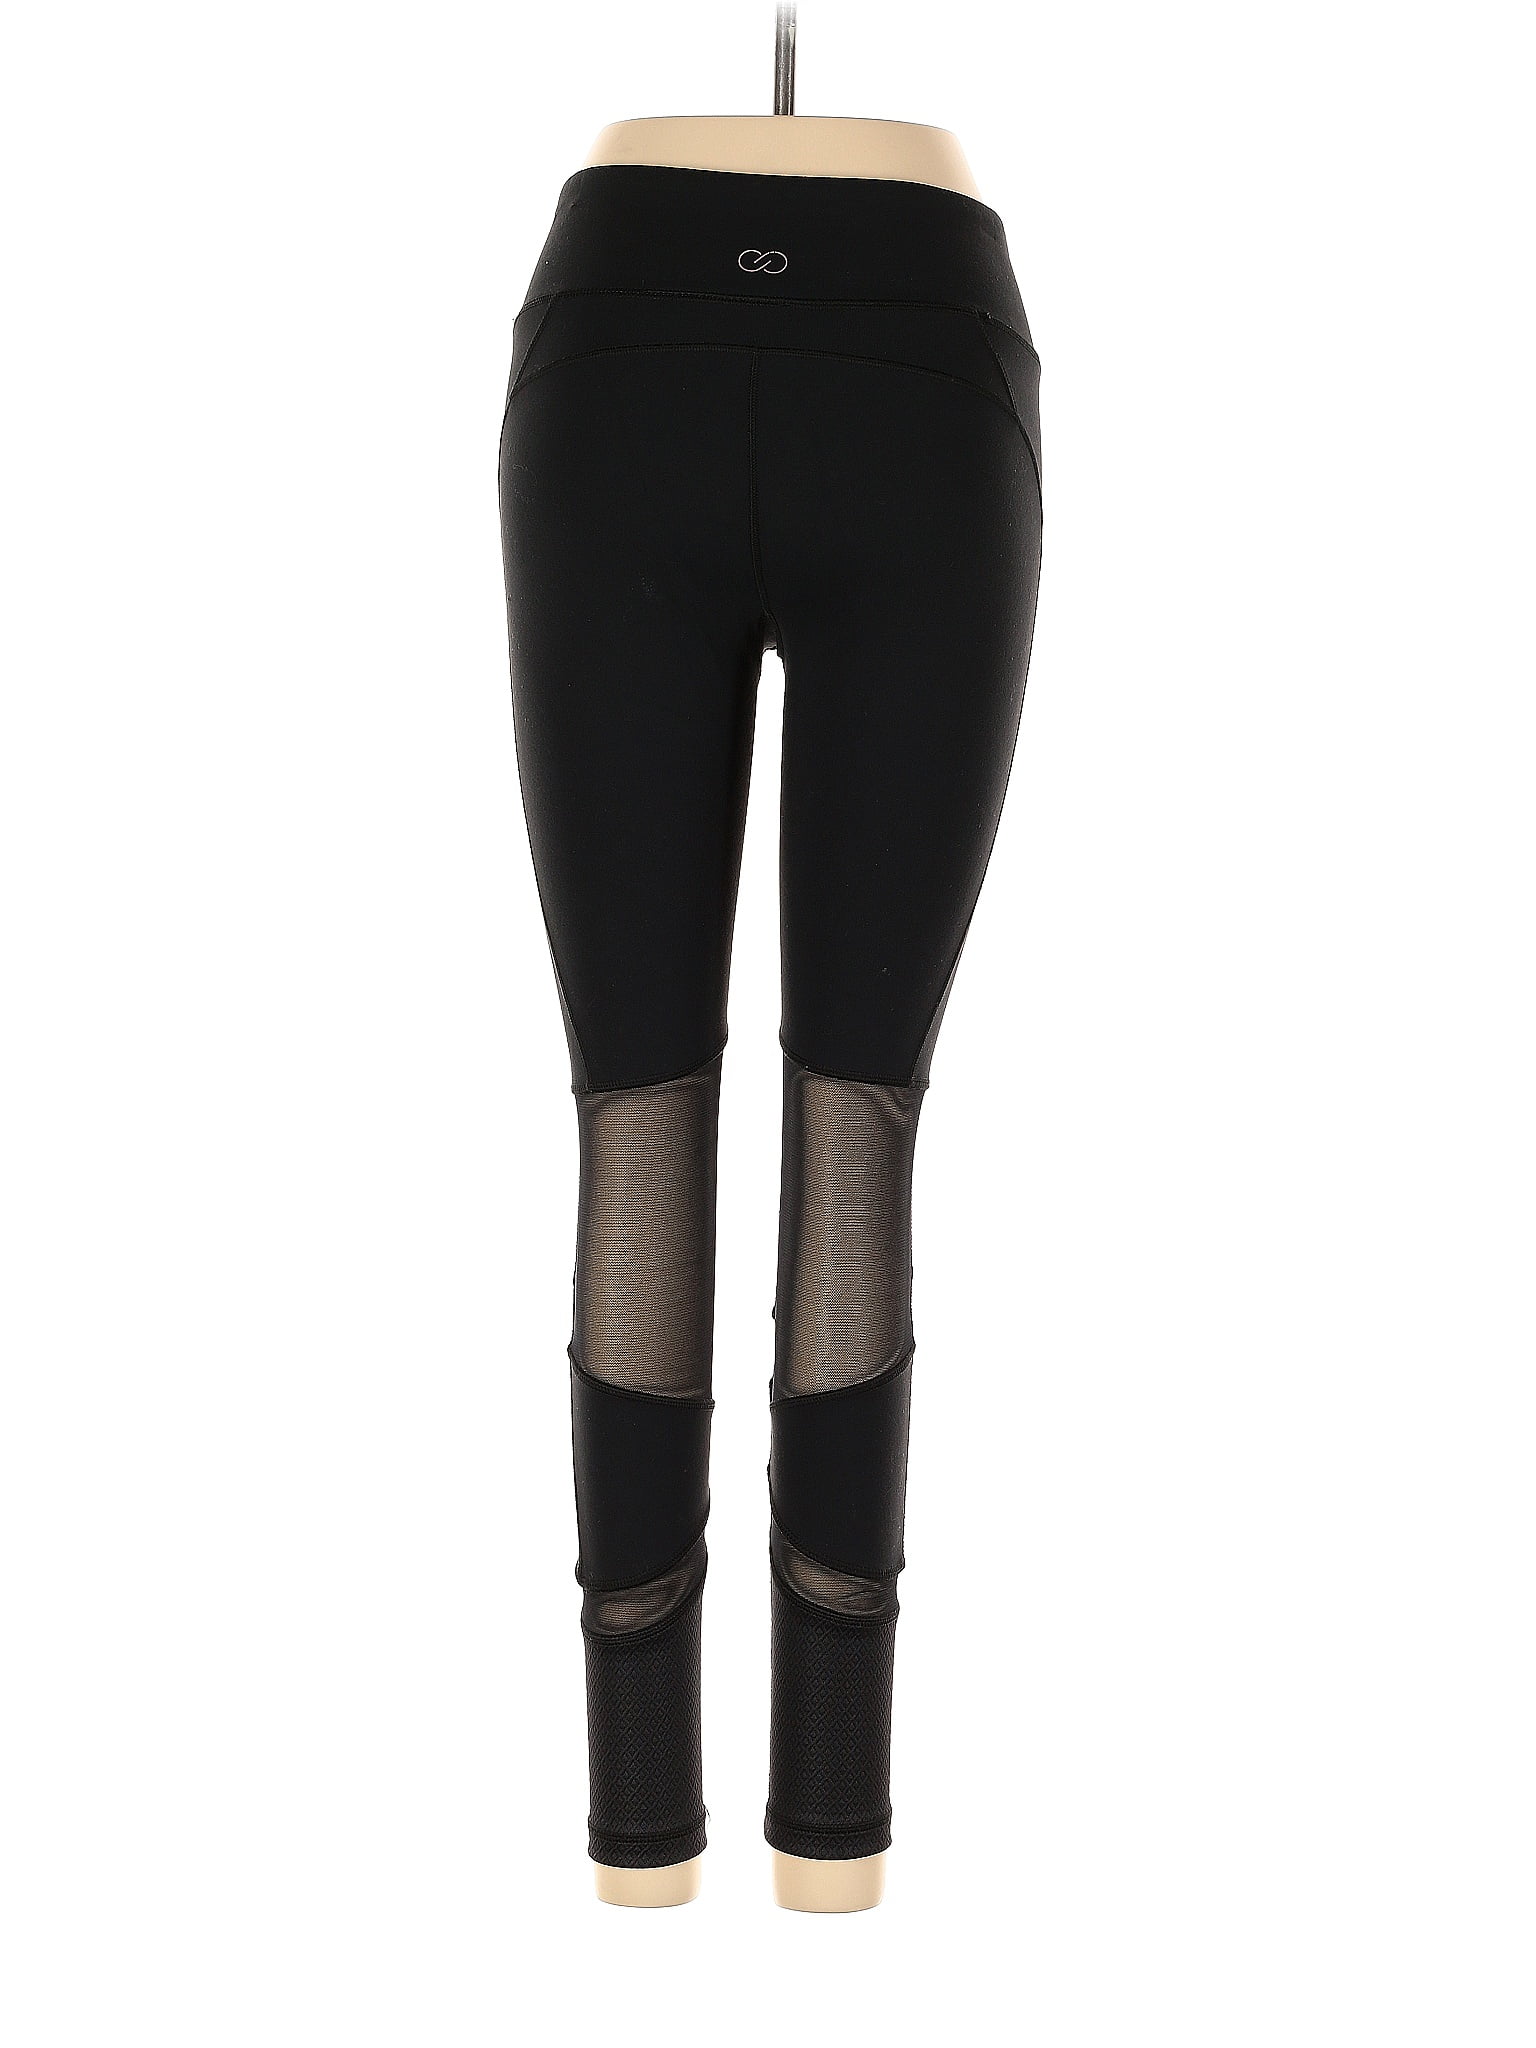 Zyia Active Solid Black Leggings Size 16 - 18 - 52% off